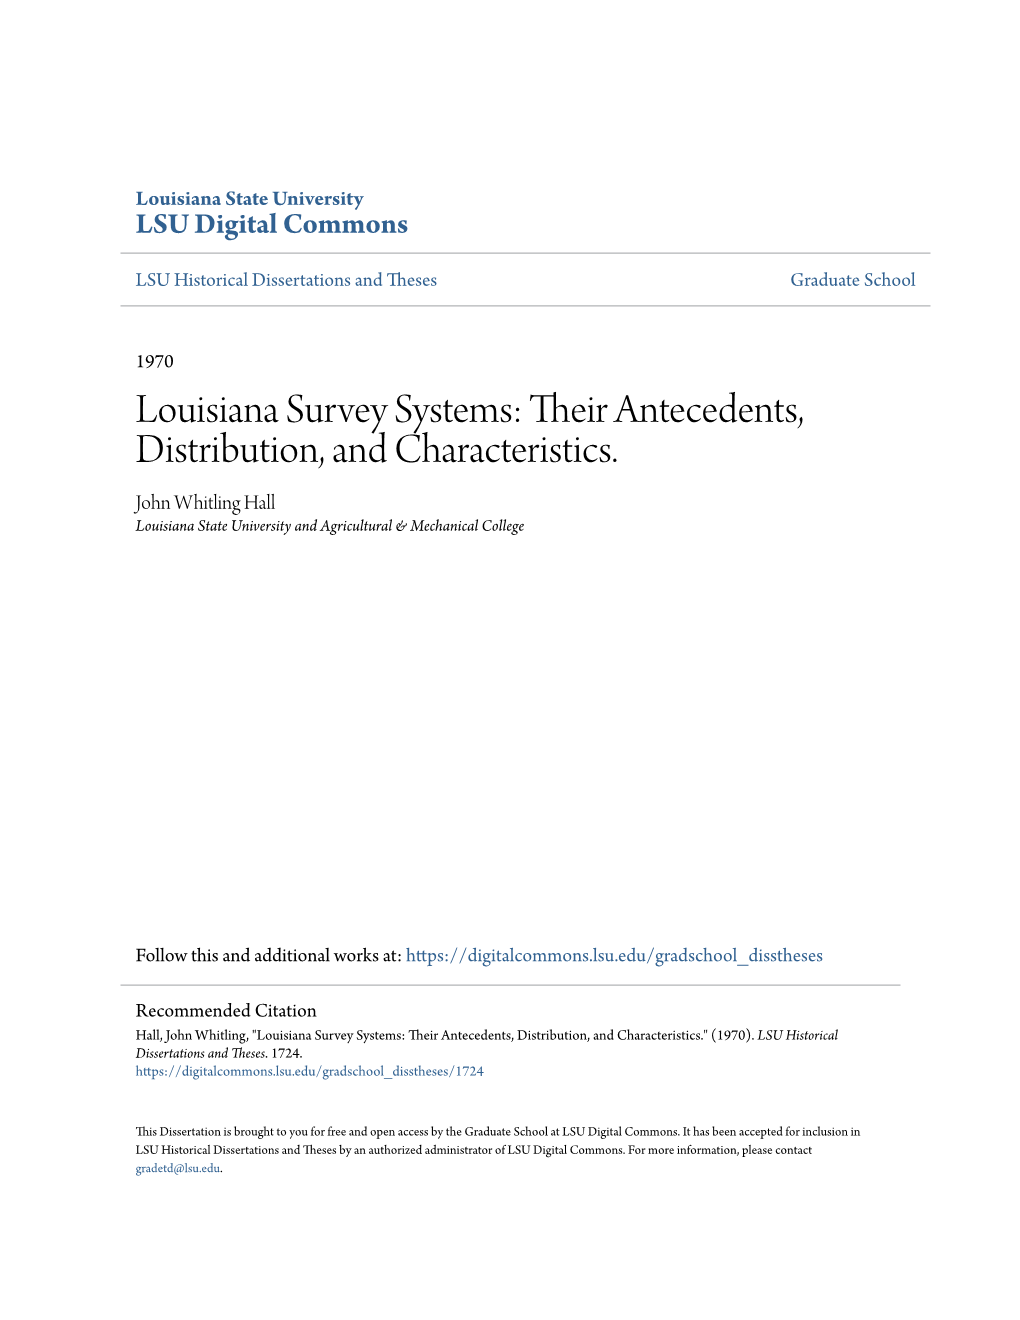 Louisiana Survey Systems: Their Antecedents, Distribution, and Characteristics